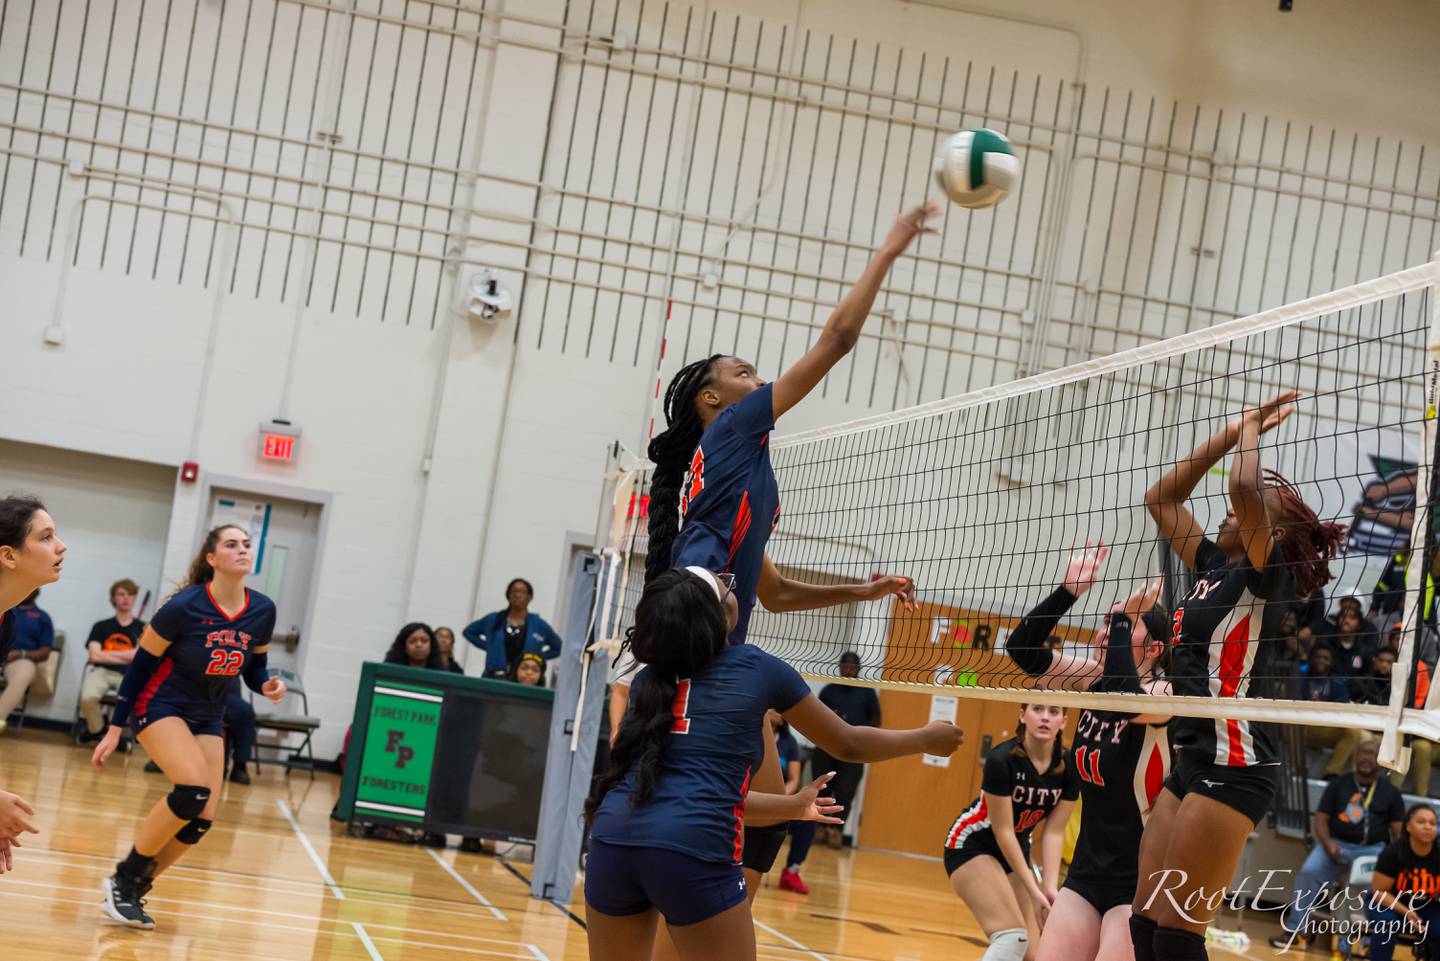 Poly's Kendyll Moore returns a shot during Tuesday's Baltimore City volleyball championship game at Forest Park. The Engineers will compete in the Class 3A North Region playoffs next week.